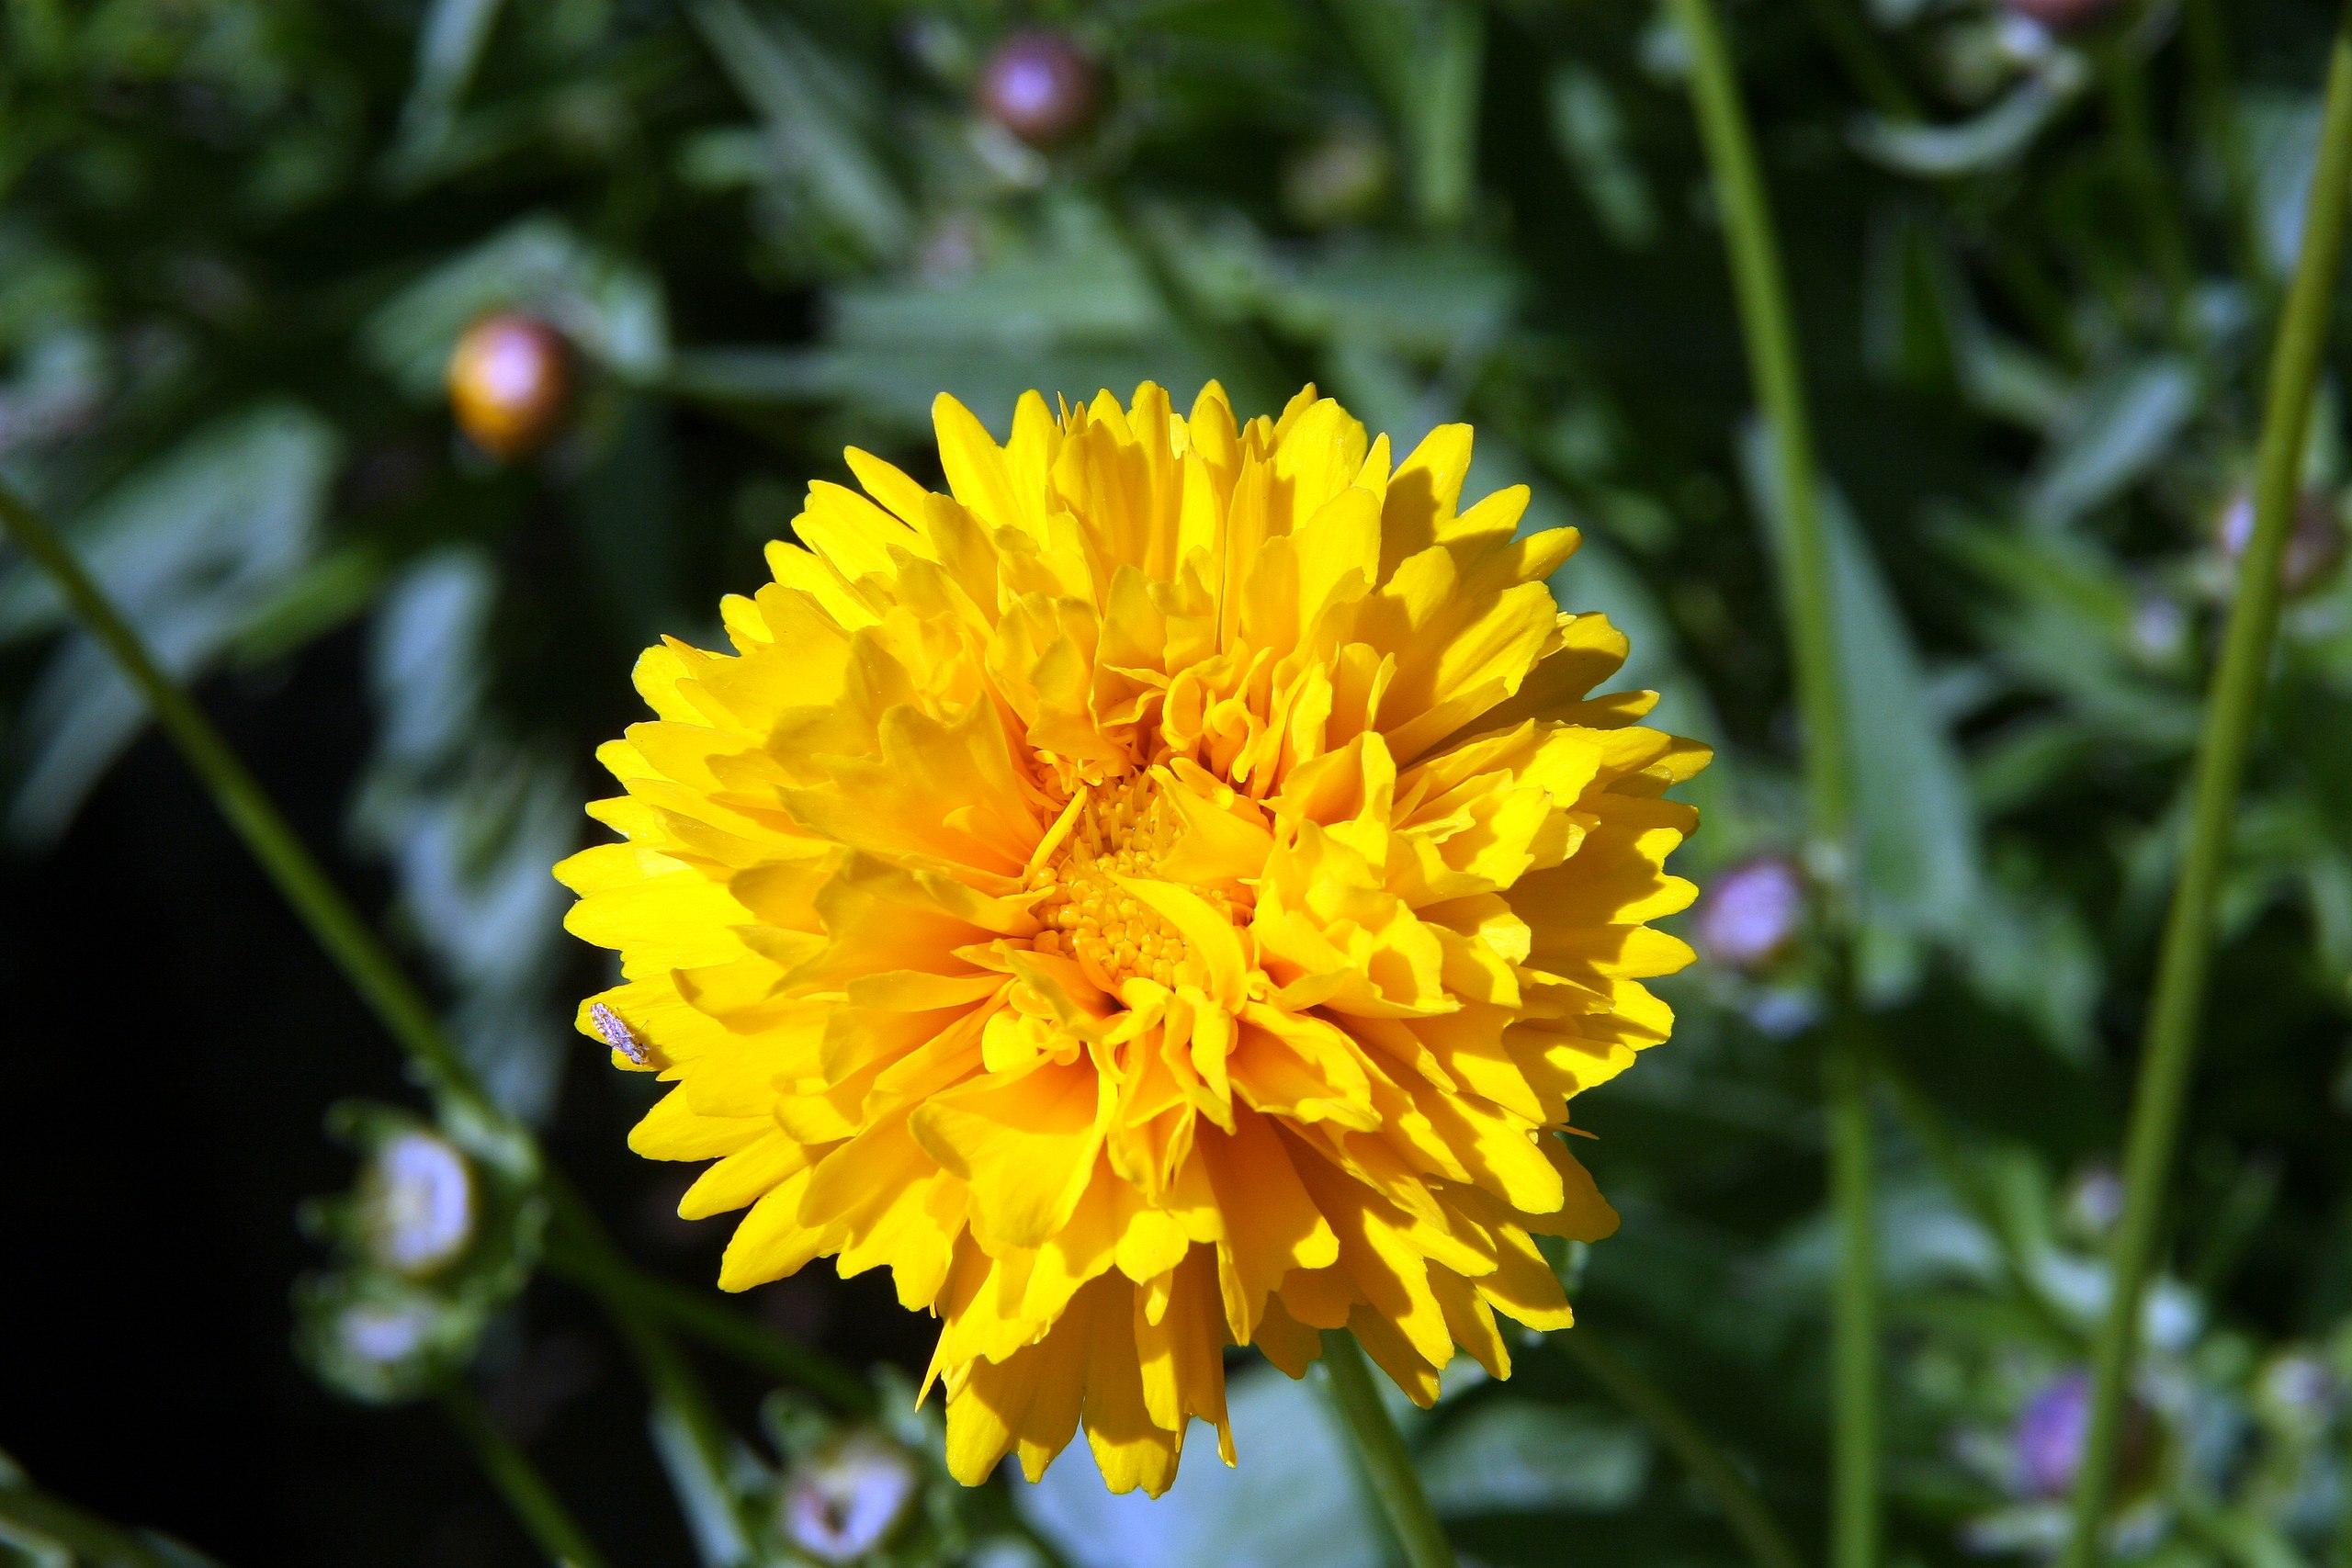 yellow flower with yellow center, purple-orange buds, green leaves and stems